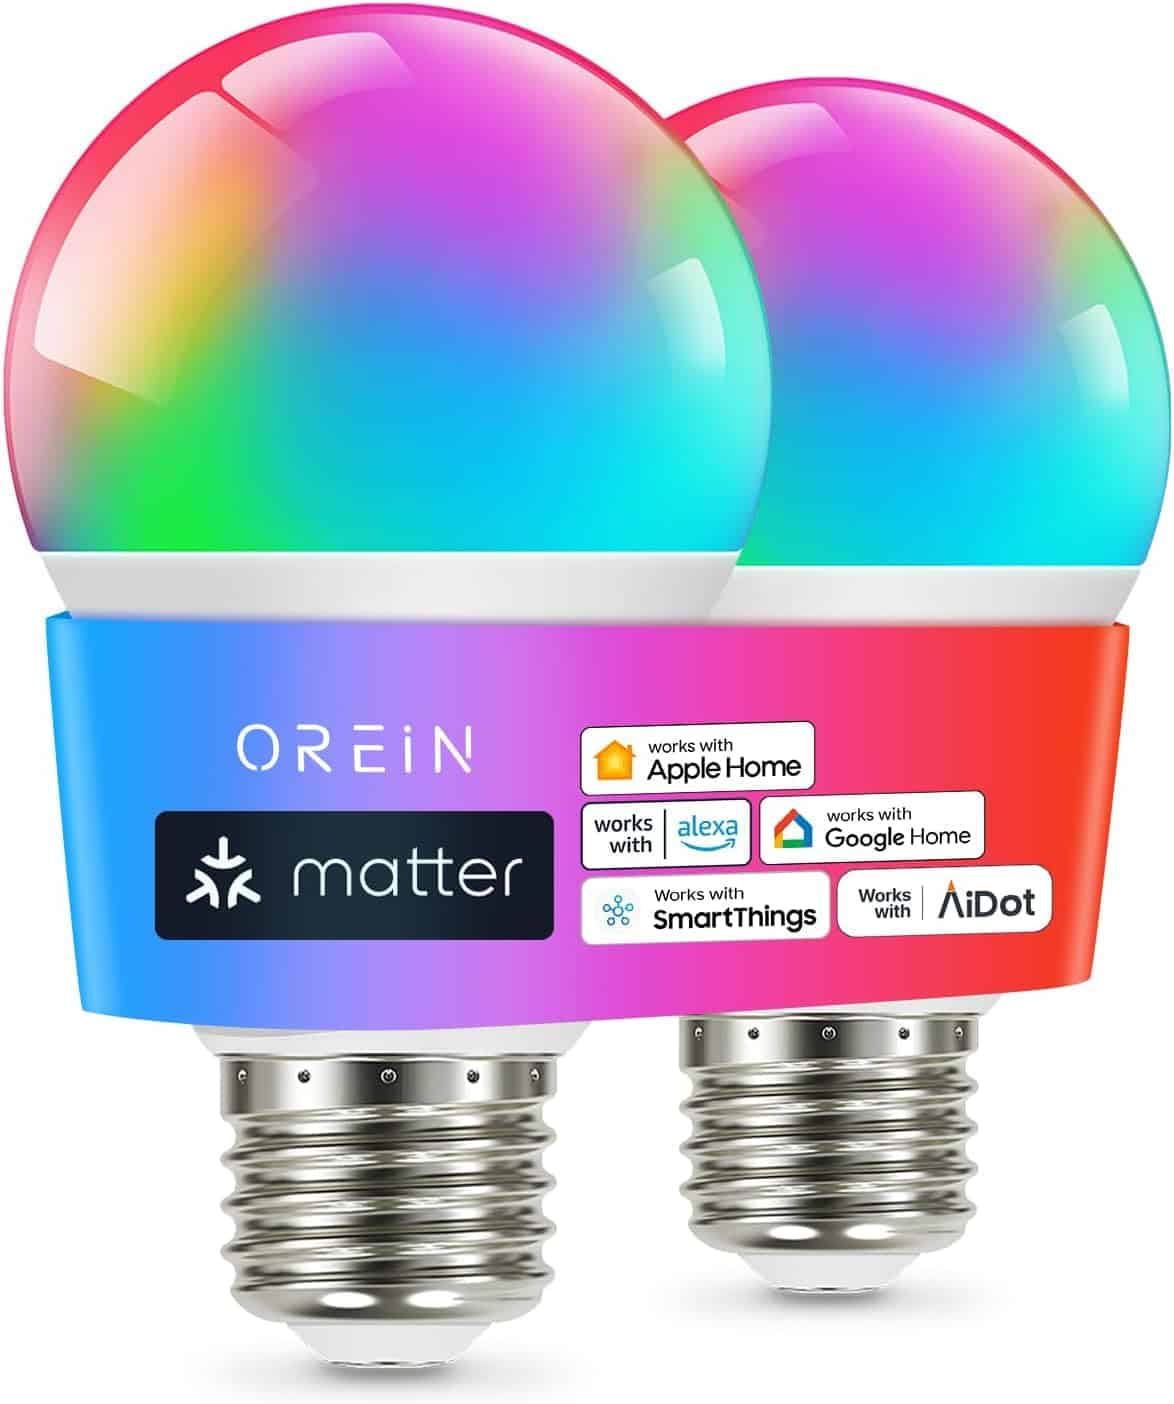 OREiN Matter Smart Light Bulbs Reliable WiFi Light Bulb with Matter A19 E26 LED Color Changing Light Bulbs 9W Equi 60W 800LM CRI90 Work with Alexa/Google Home/Apple Home/SmartThings/Siri 2Pack